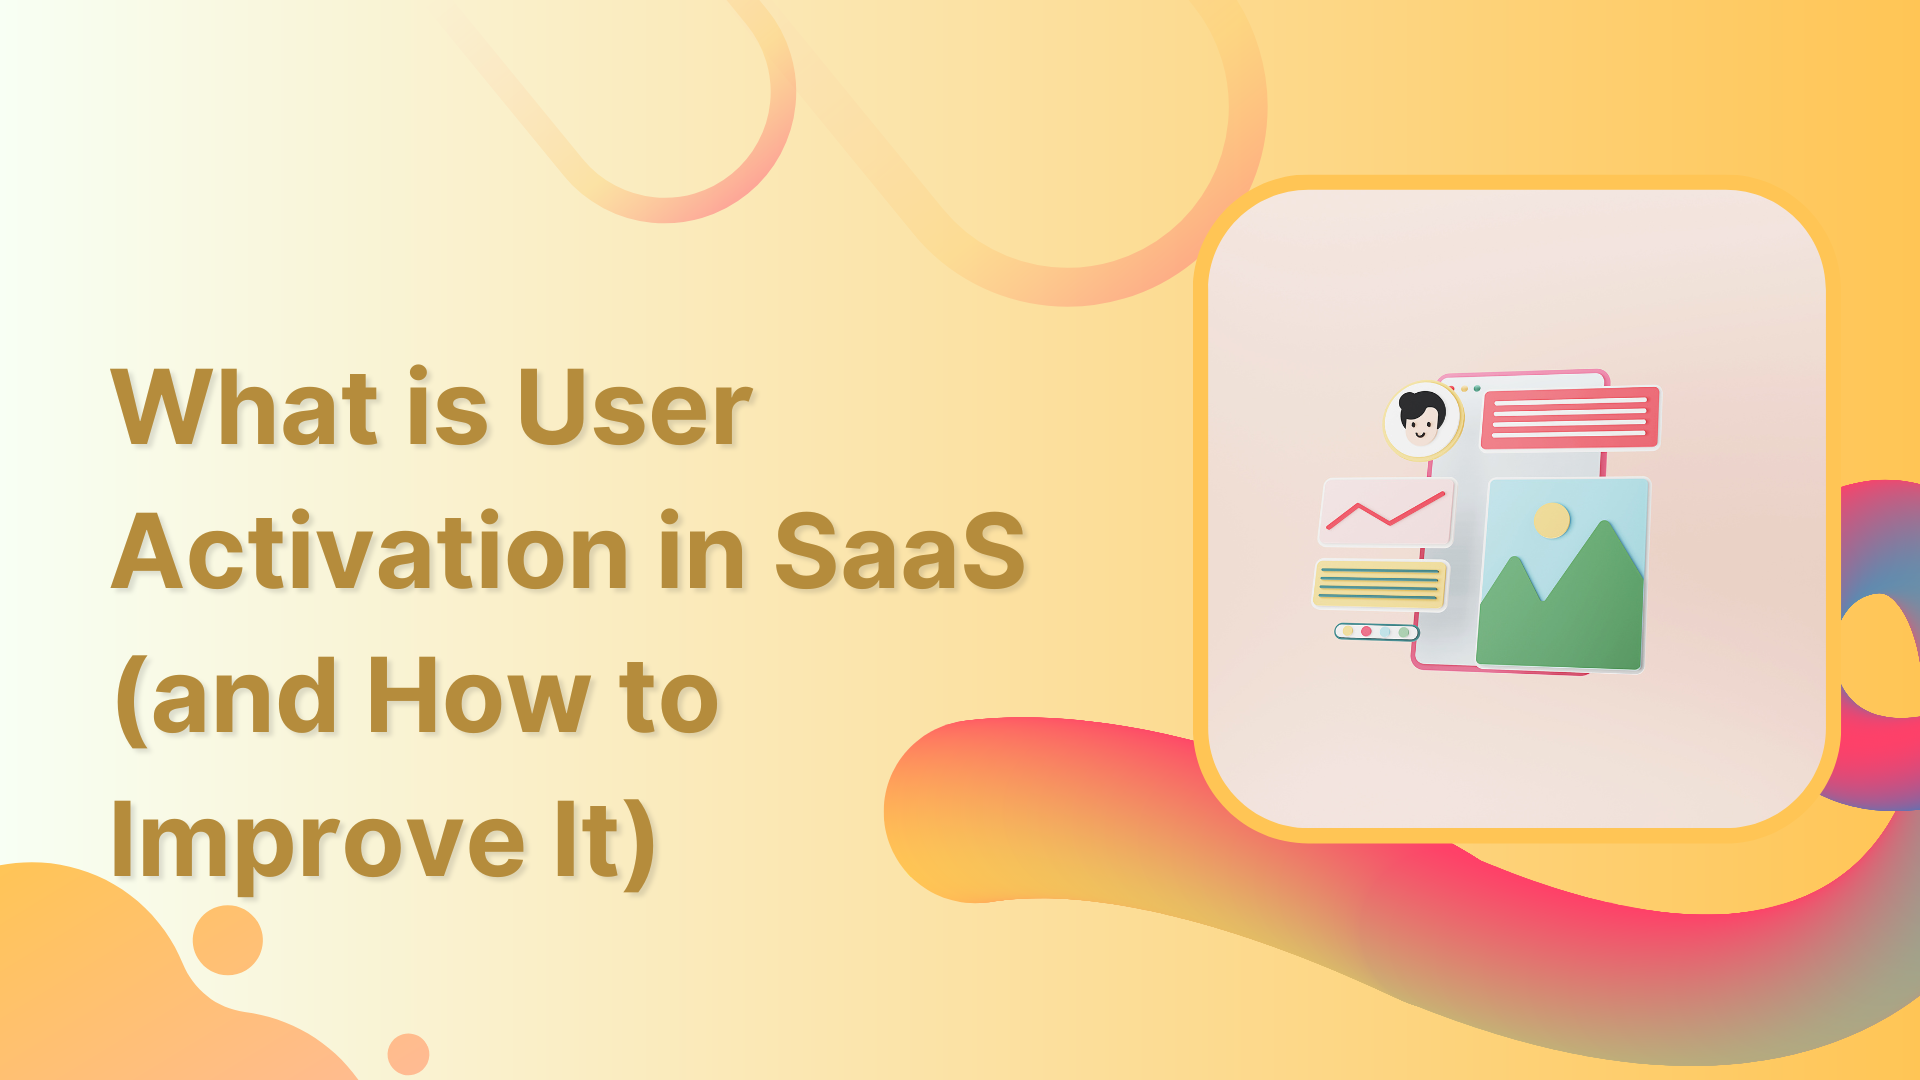 What Is User Activation in SaaS And How To Improve It